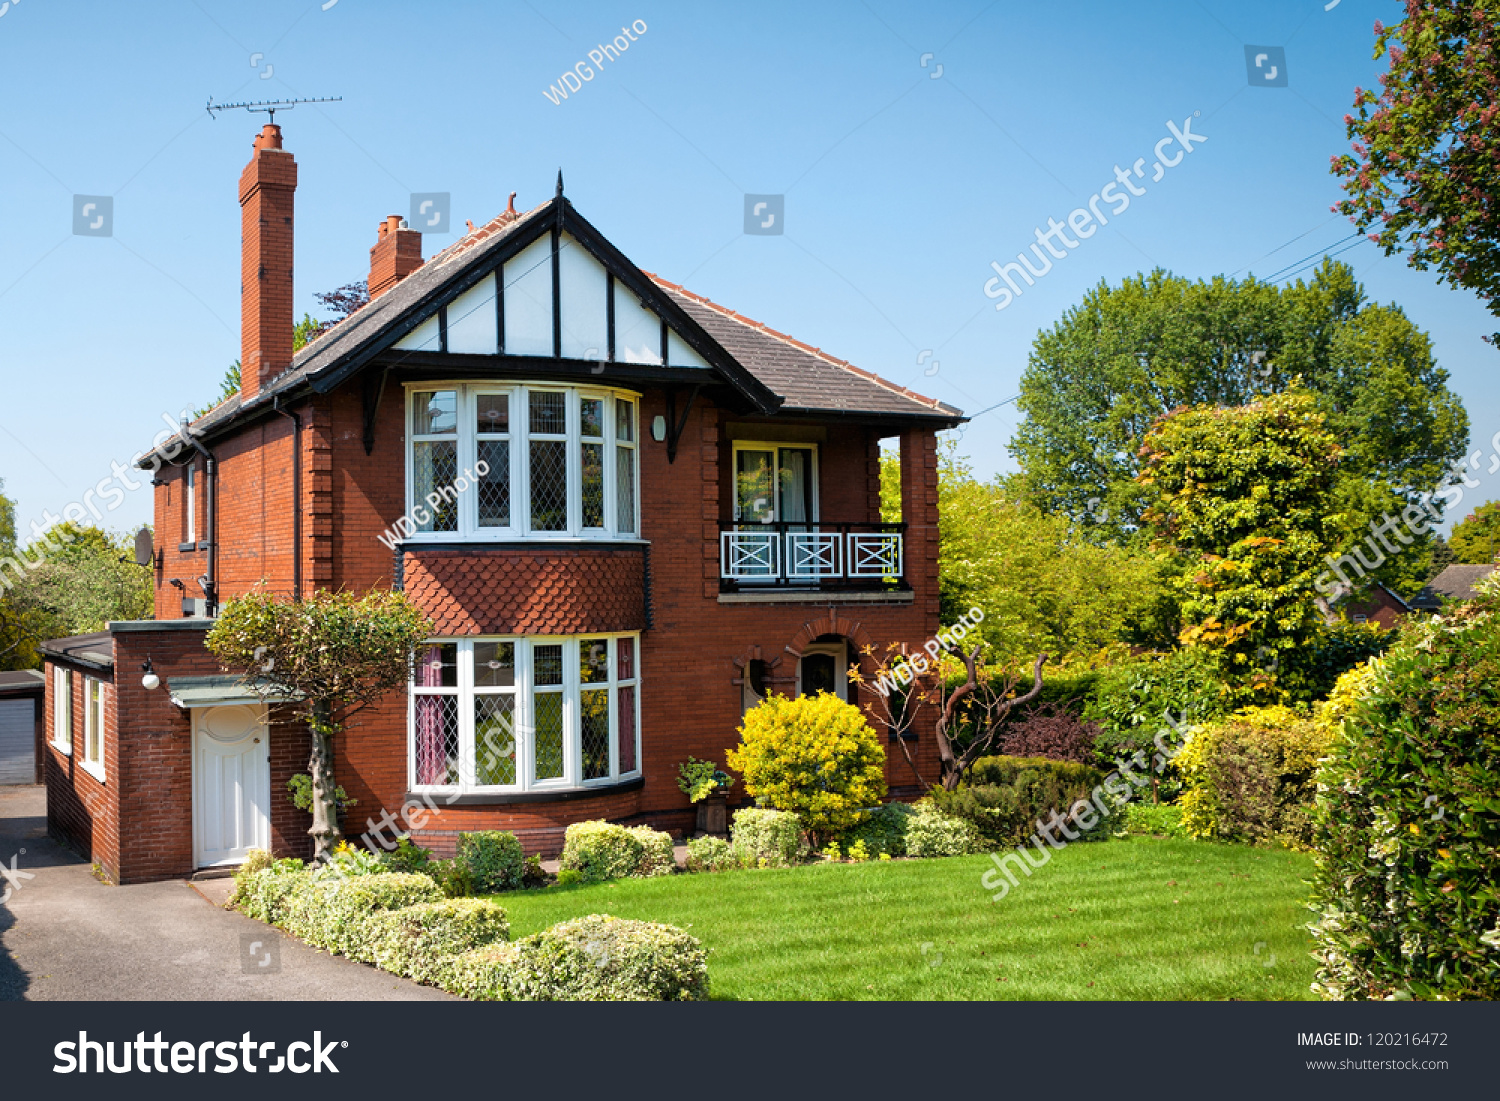 Typical English house with a garden #120216472